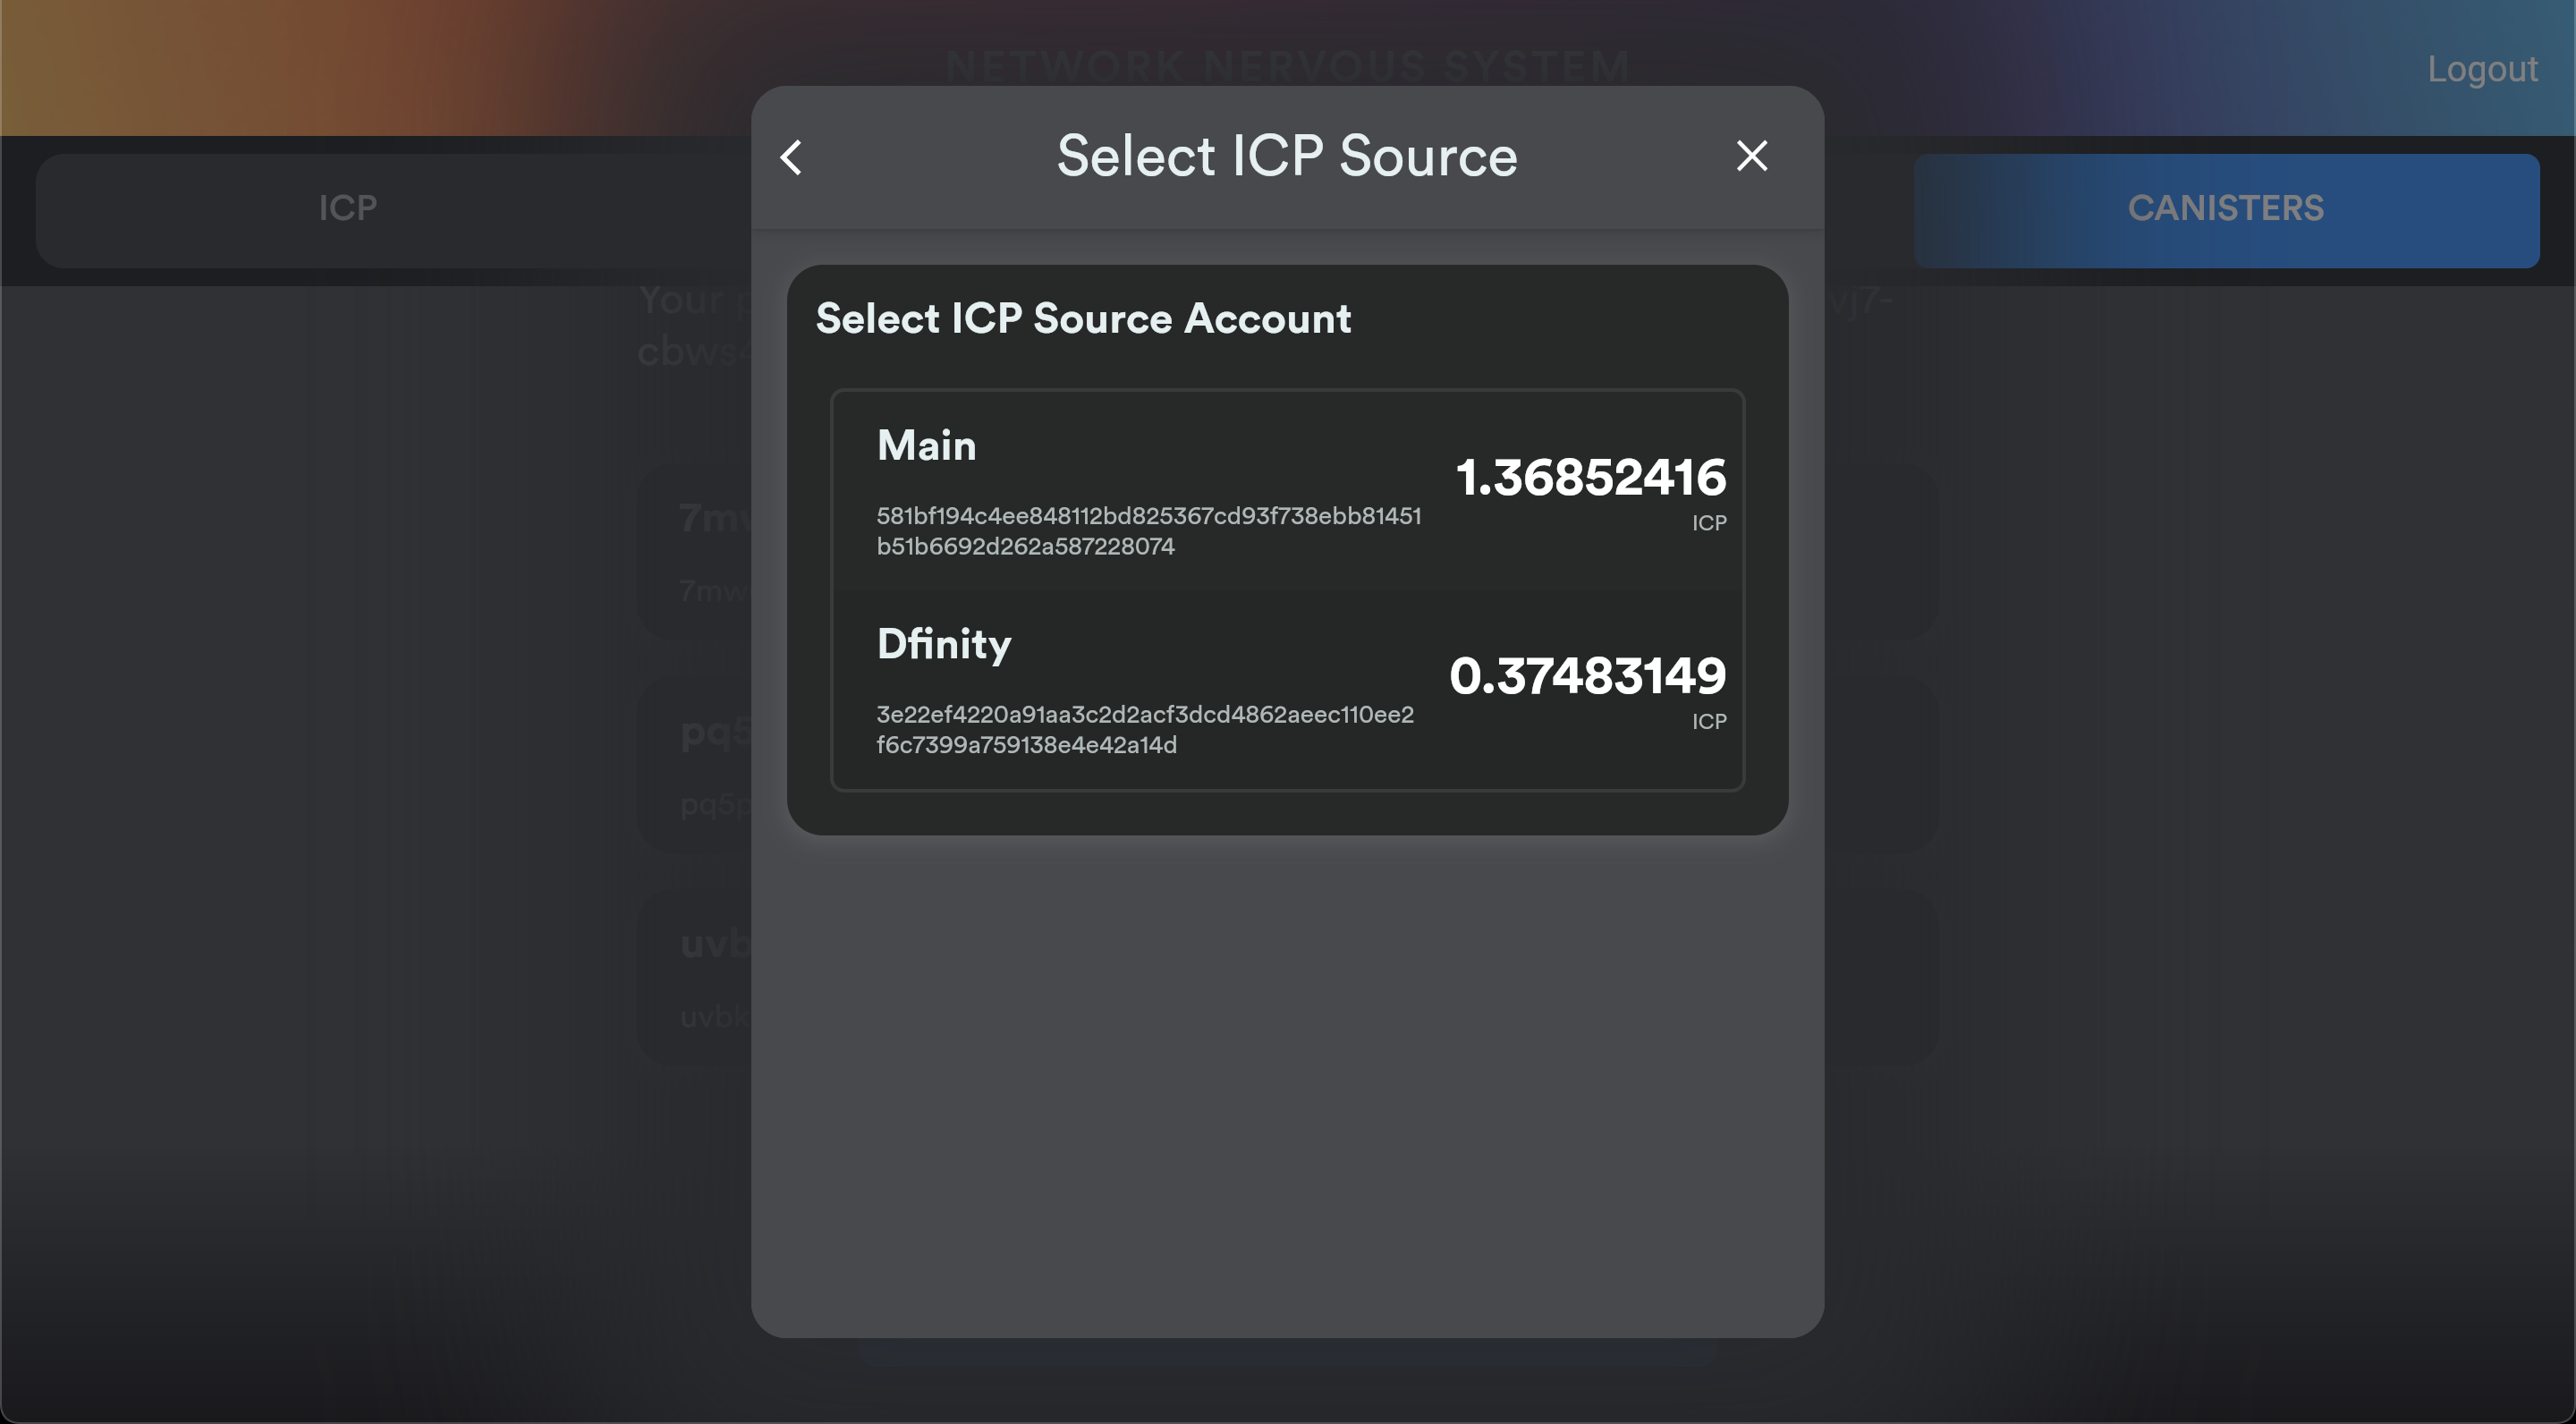 Select ICP Source Account